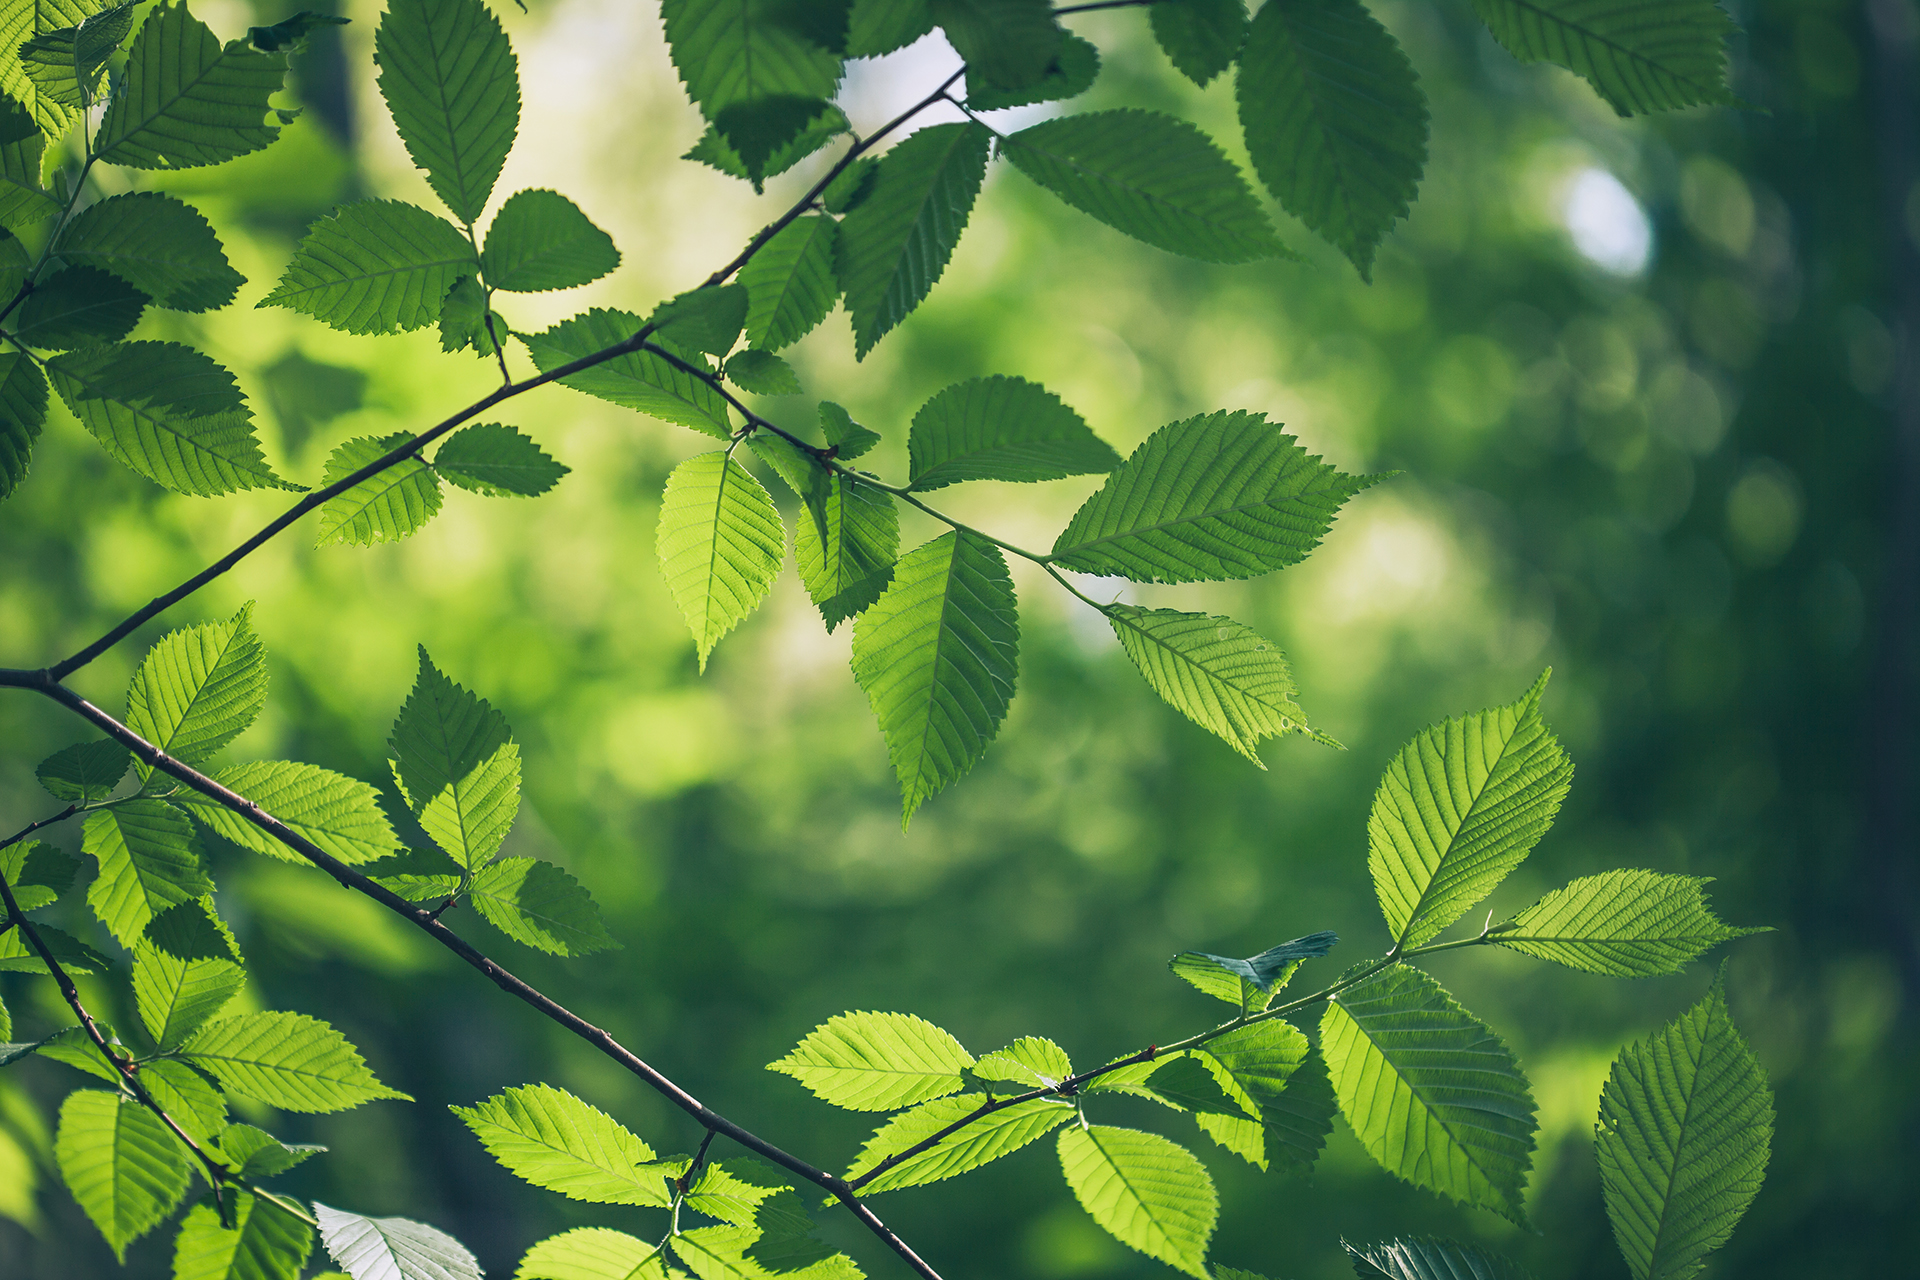 Landscape Image of Leafy Branches with Bokeh